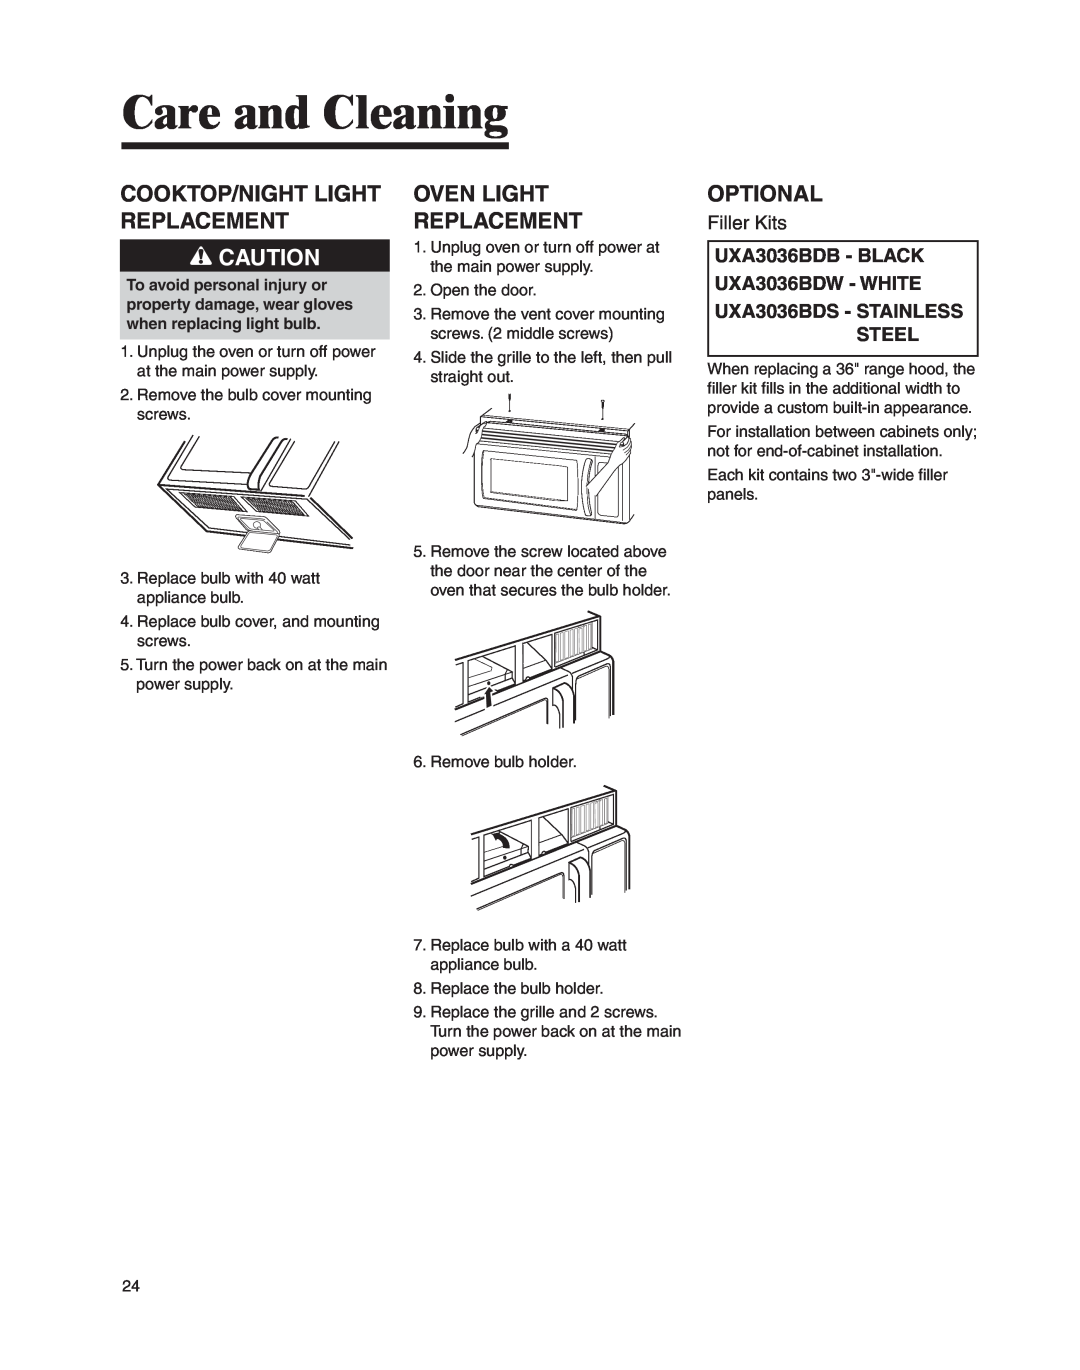 Whirlpool MMV4205BA Cooktop/Night Light Replacement, Oven Light Replacement, Optional, Filler Kits, Care and Cleaning 